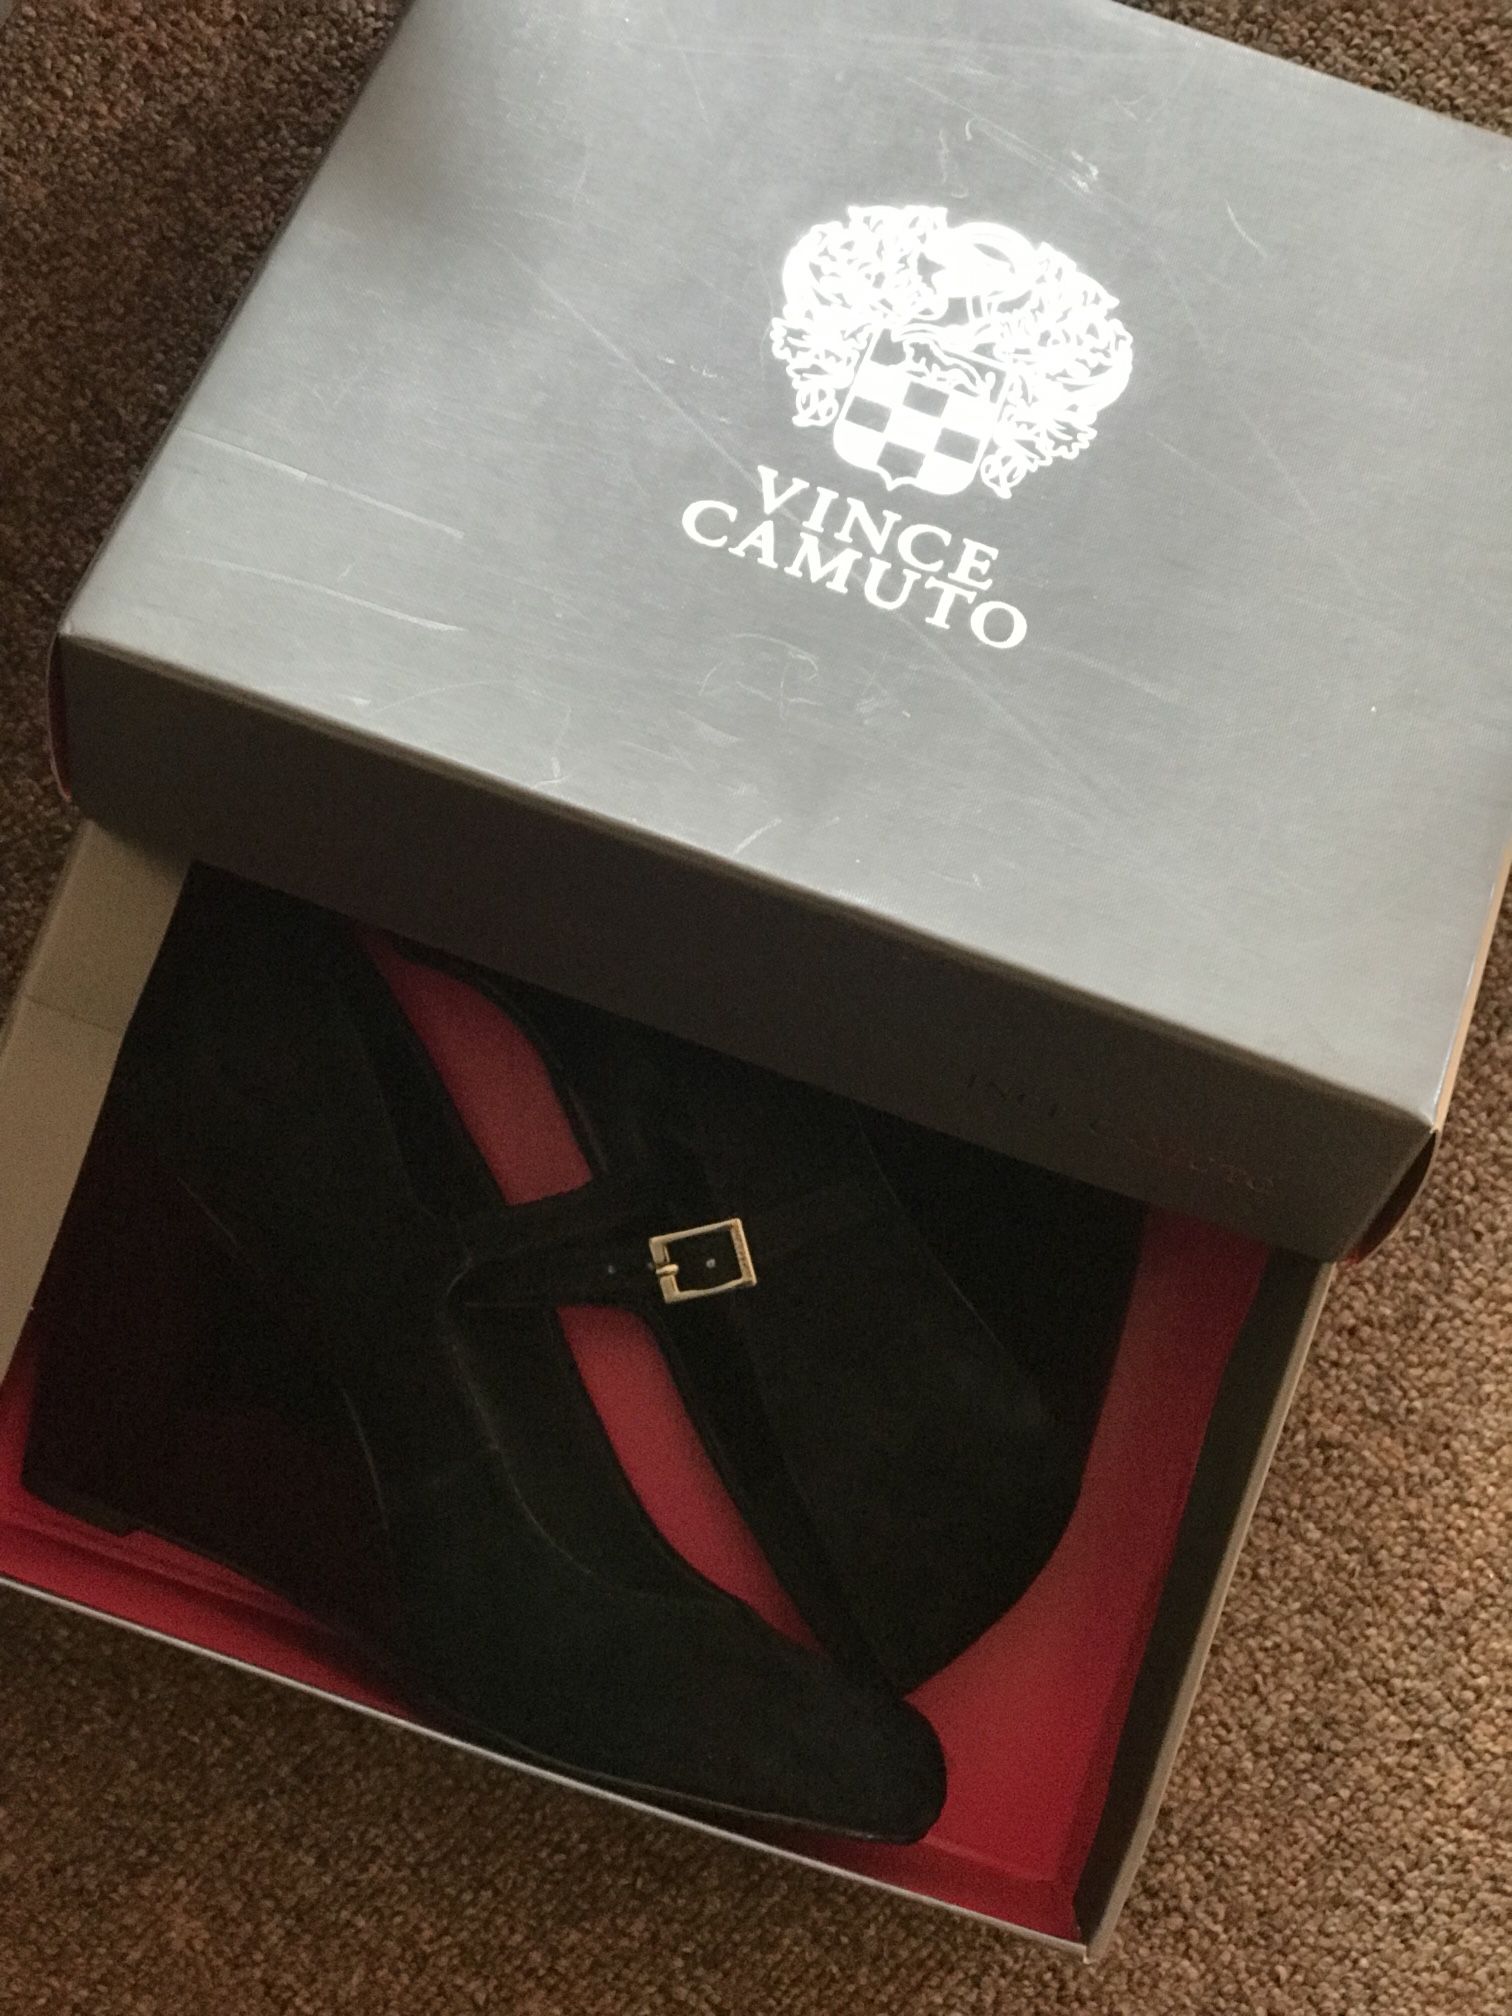 Vince Camuto Shoes for Sale in Laredo, TX - OfferUp